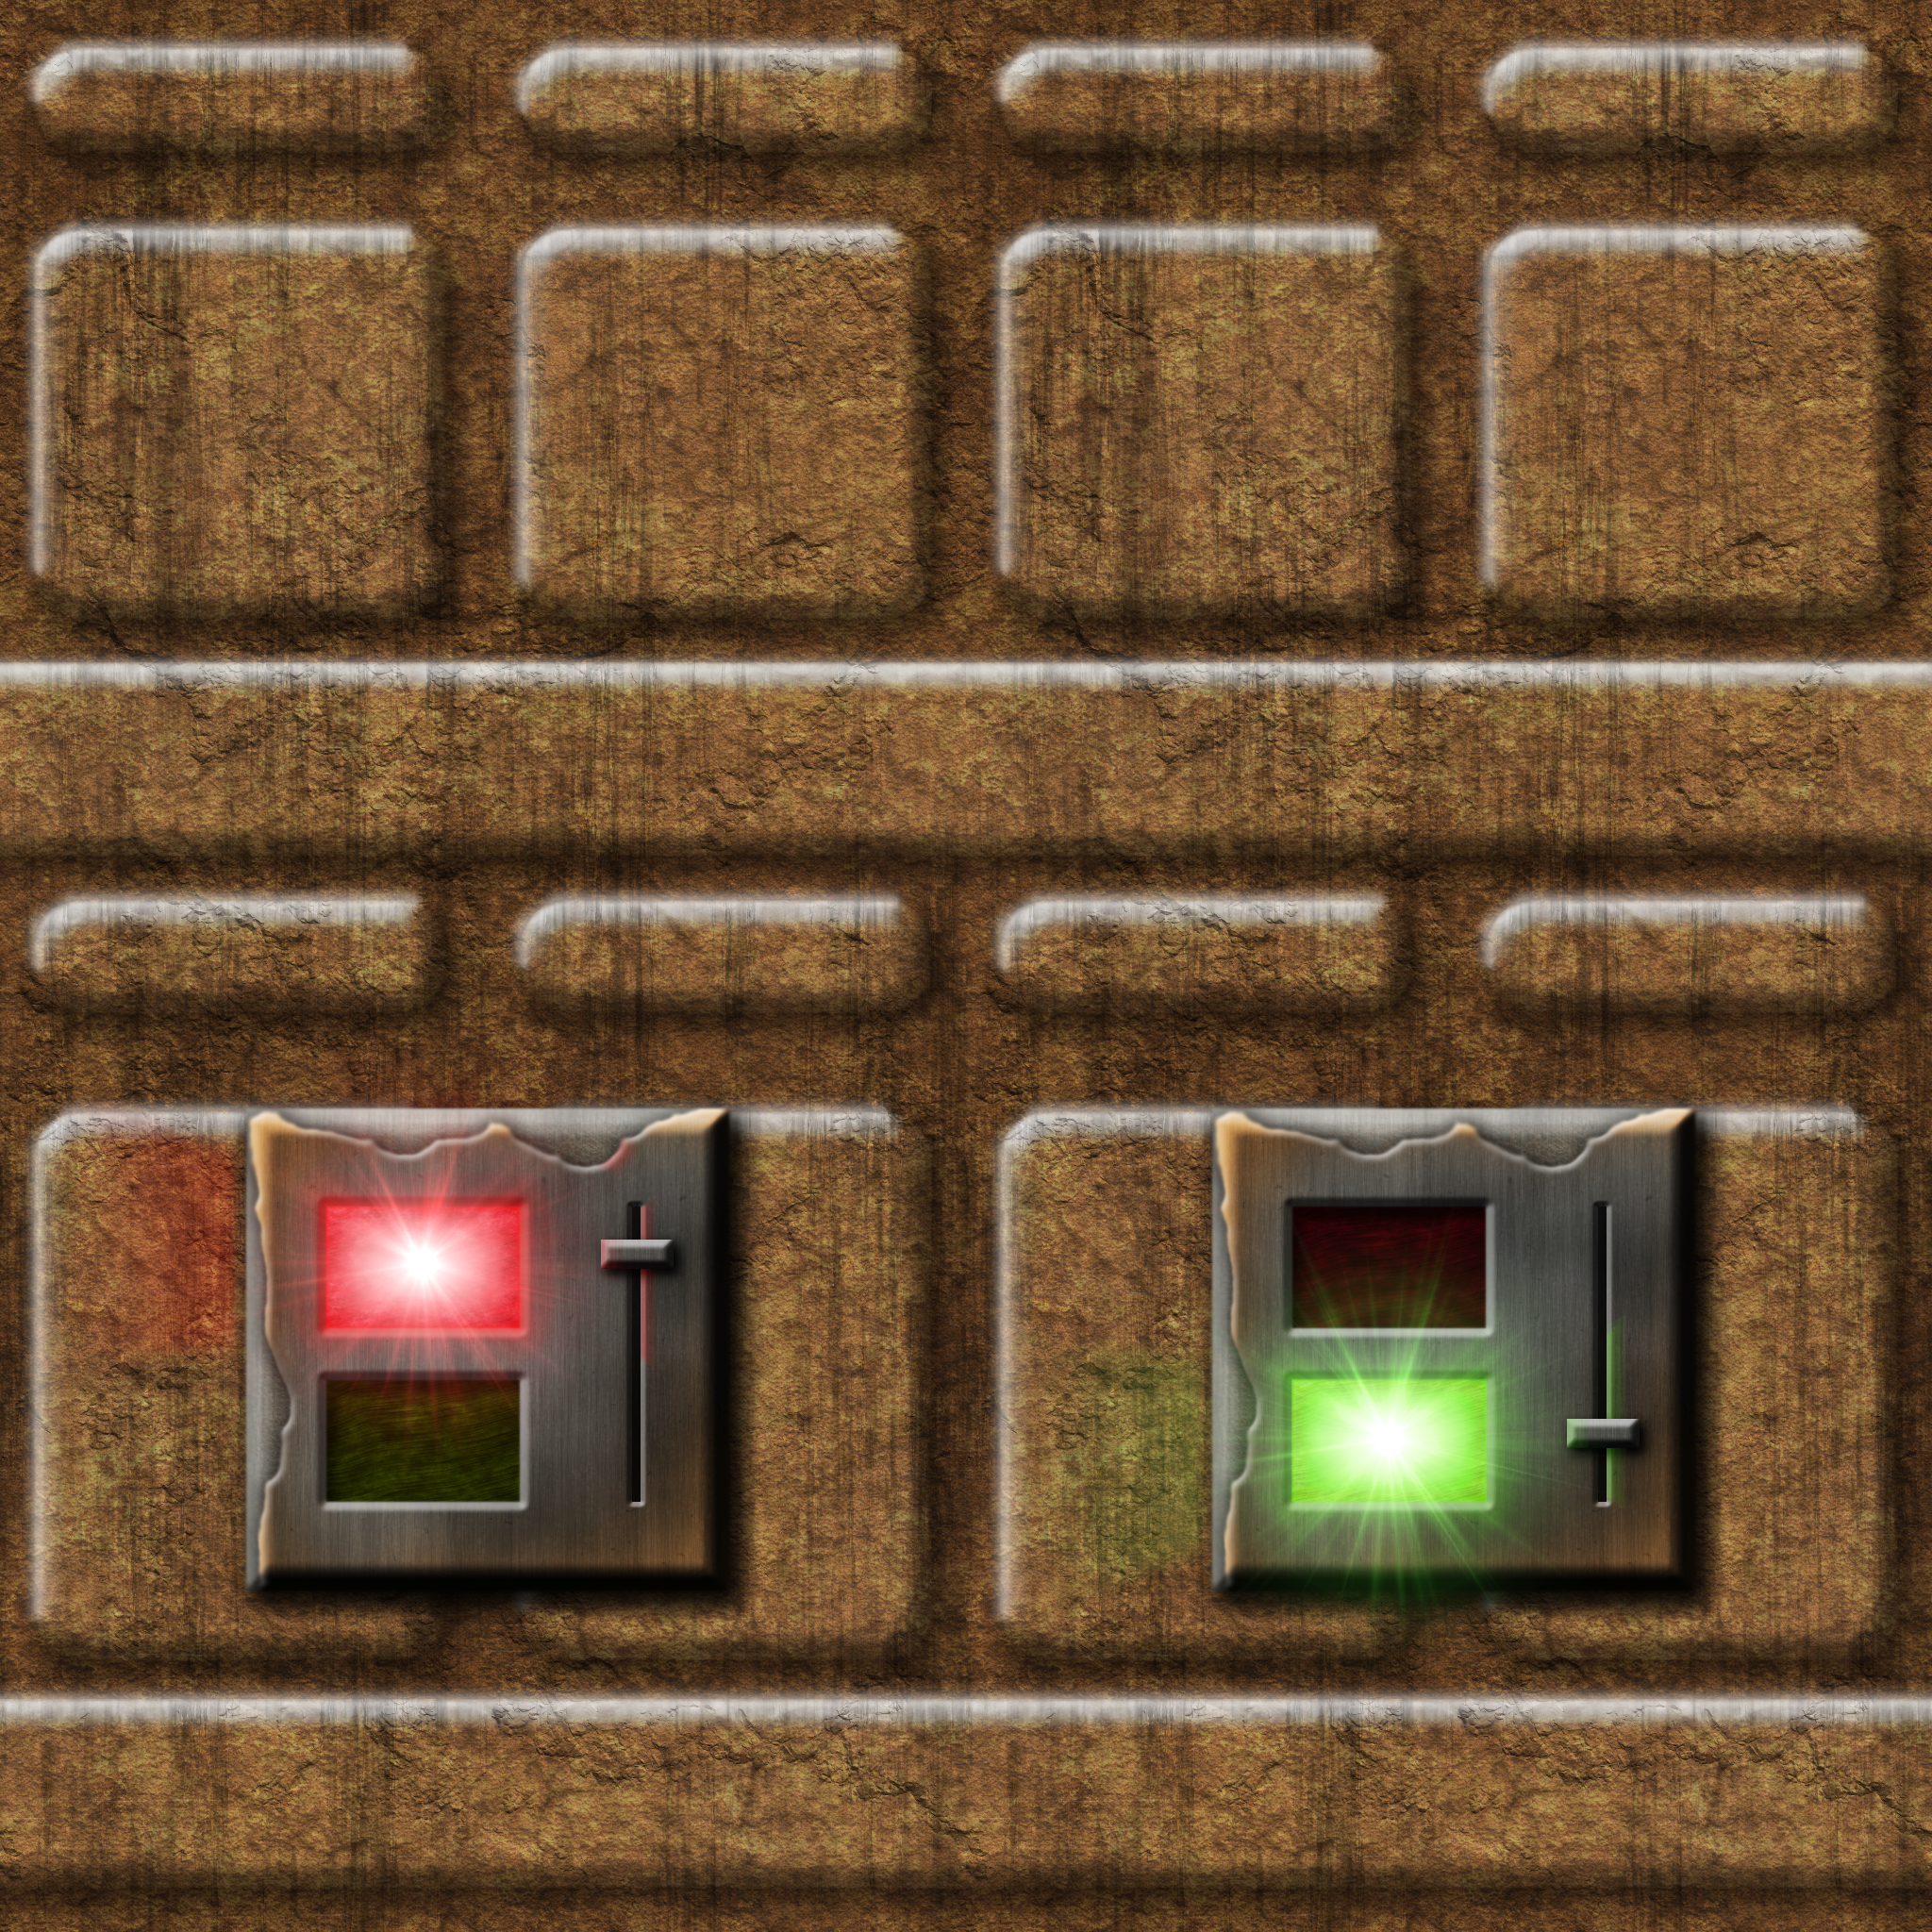 switch_on_brown_wall__by_hoover1979-daas94x.png